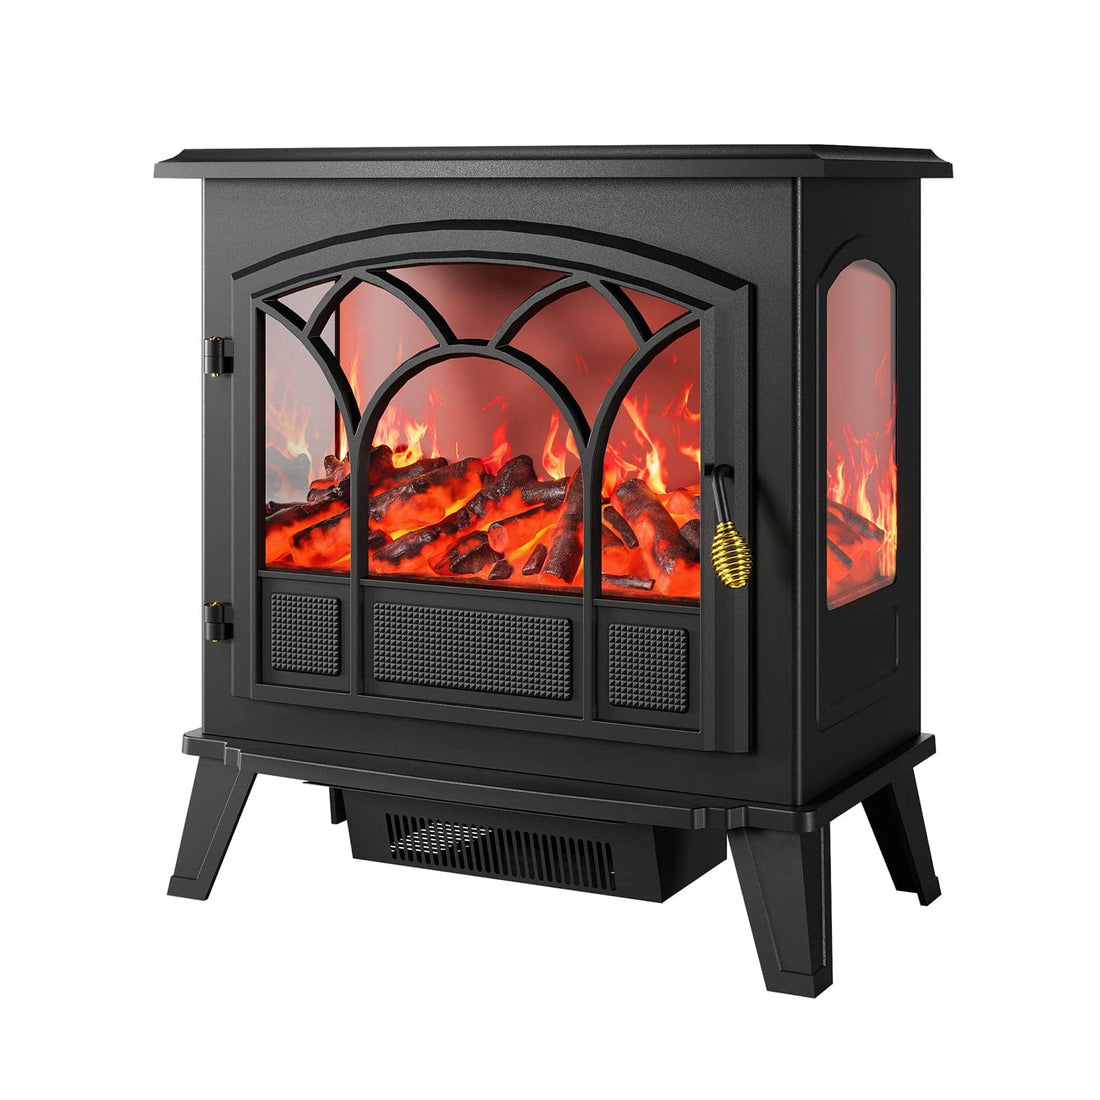 26.4 Inch Electric Fireplace Heater 750/1500W Freestanding Fireplace Space Heater